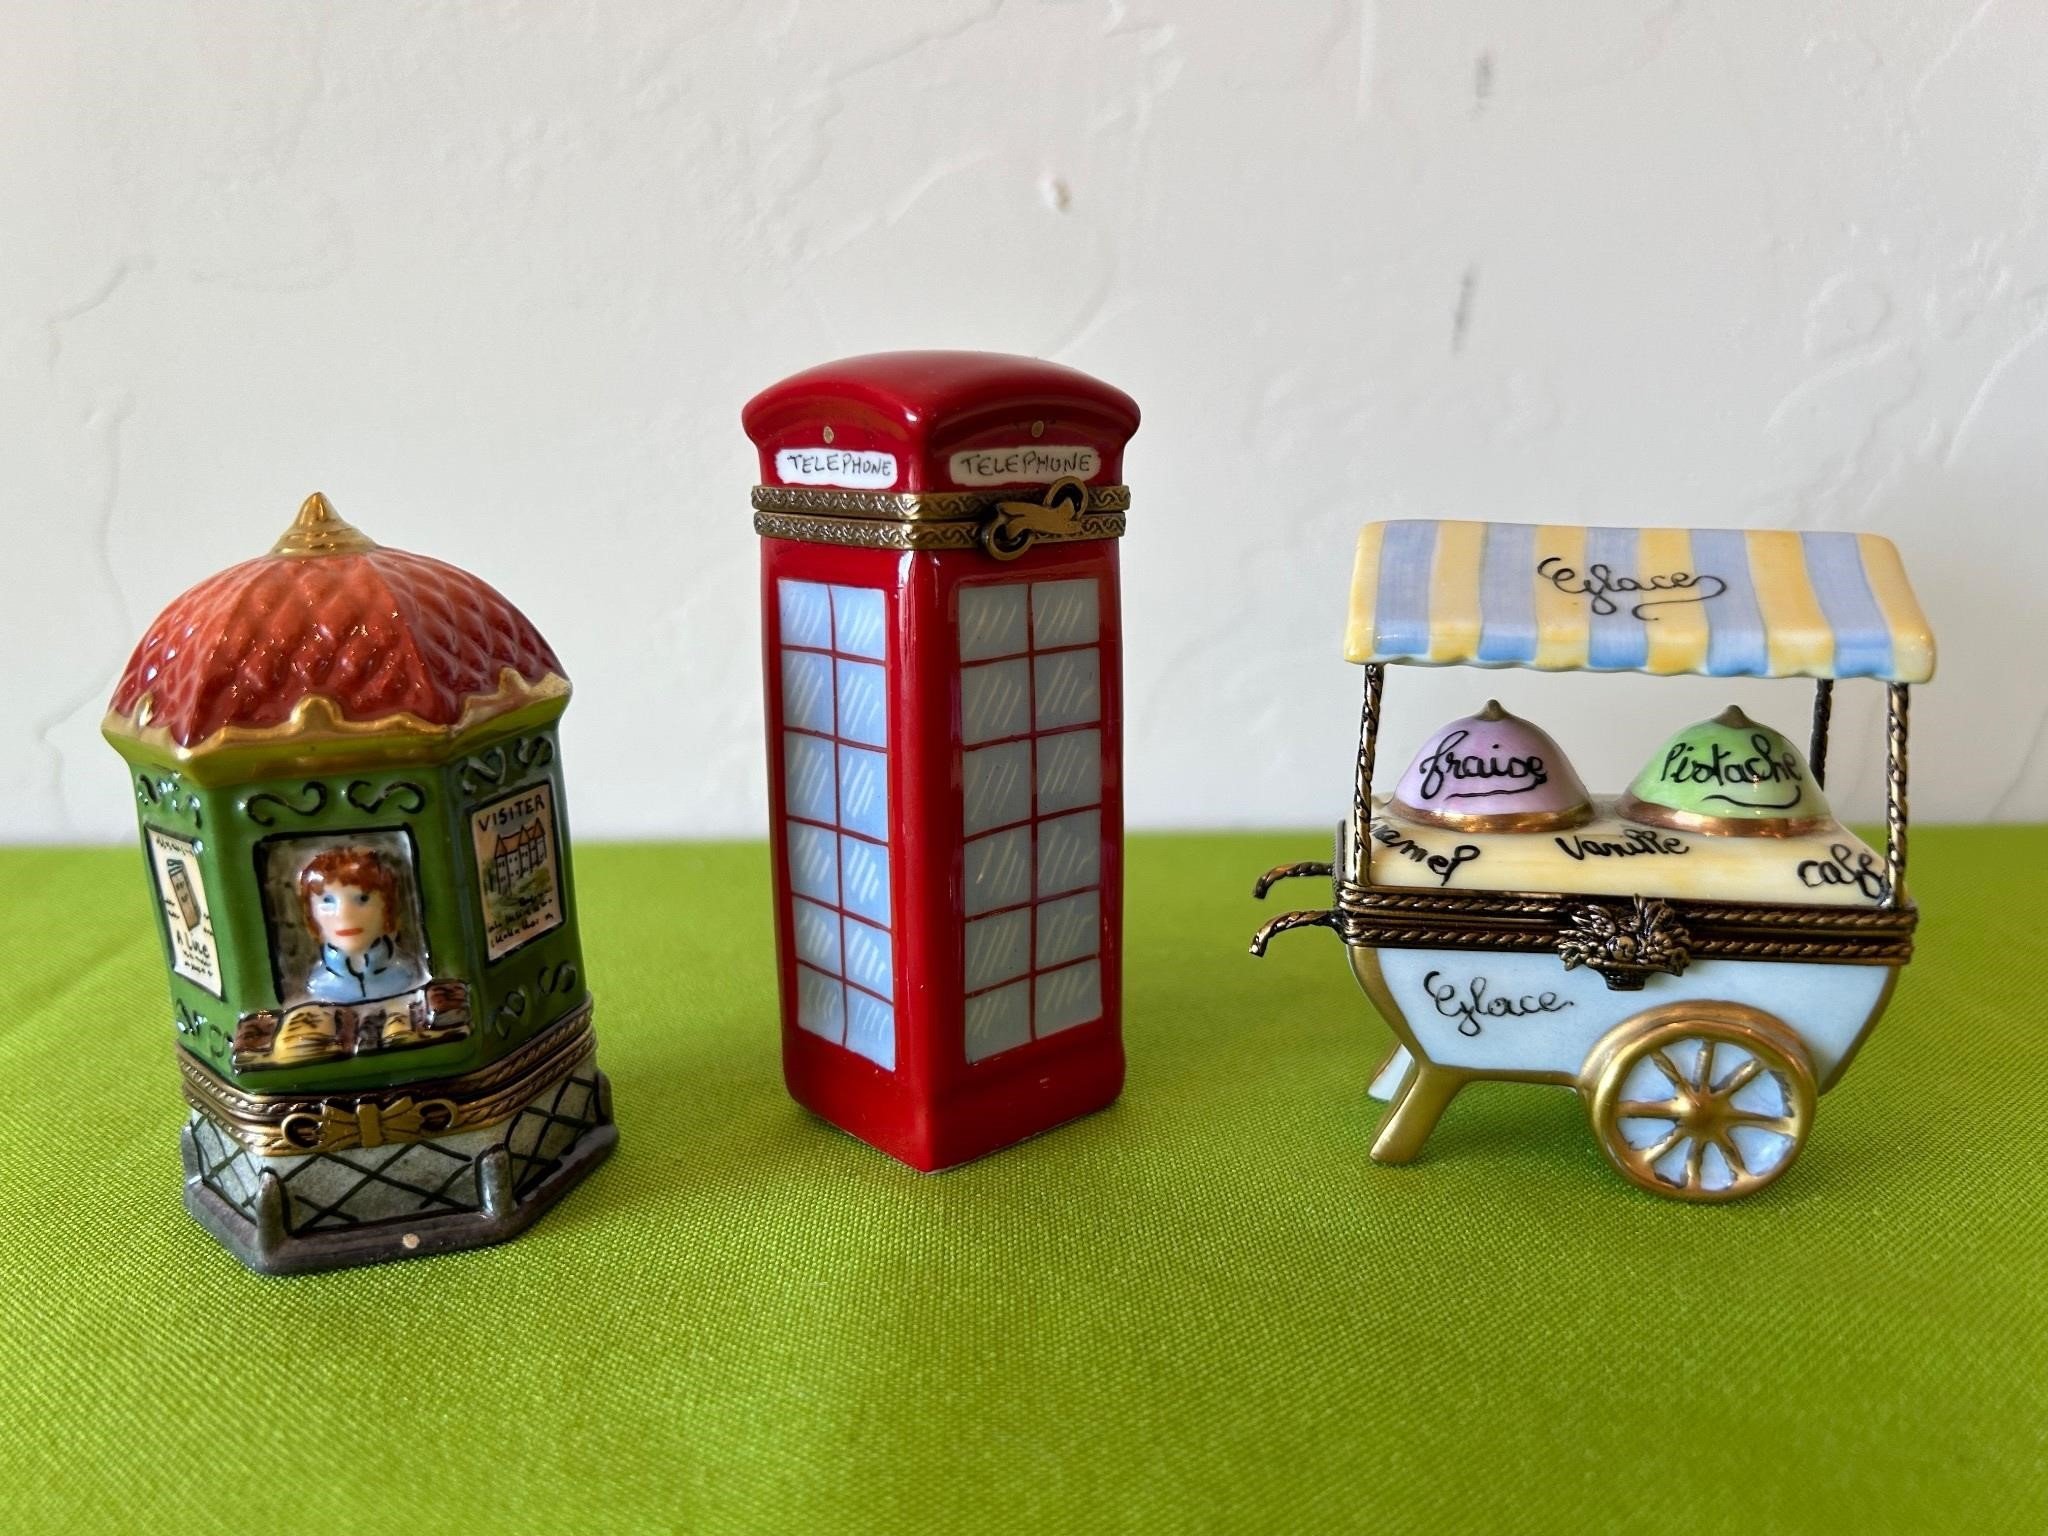 Limoges Ceramic Trinket Boxes, Telephone Booth +